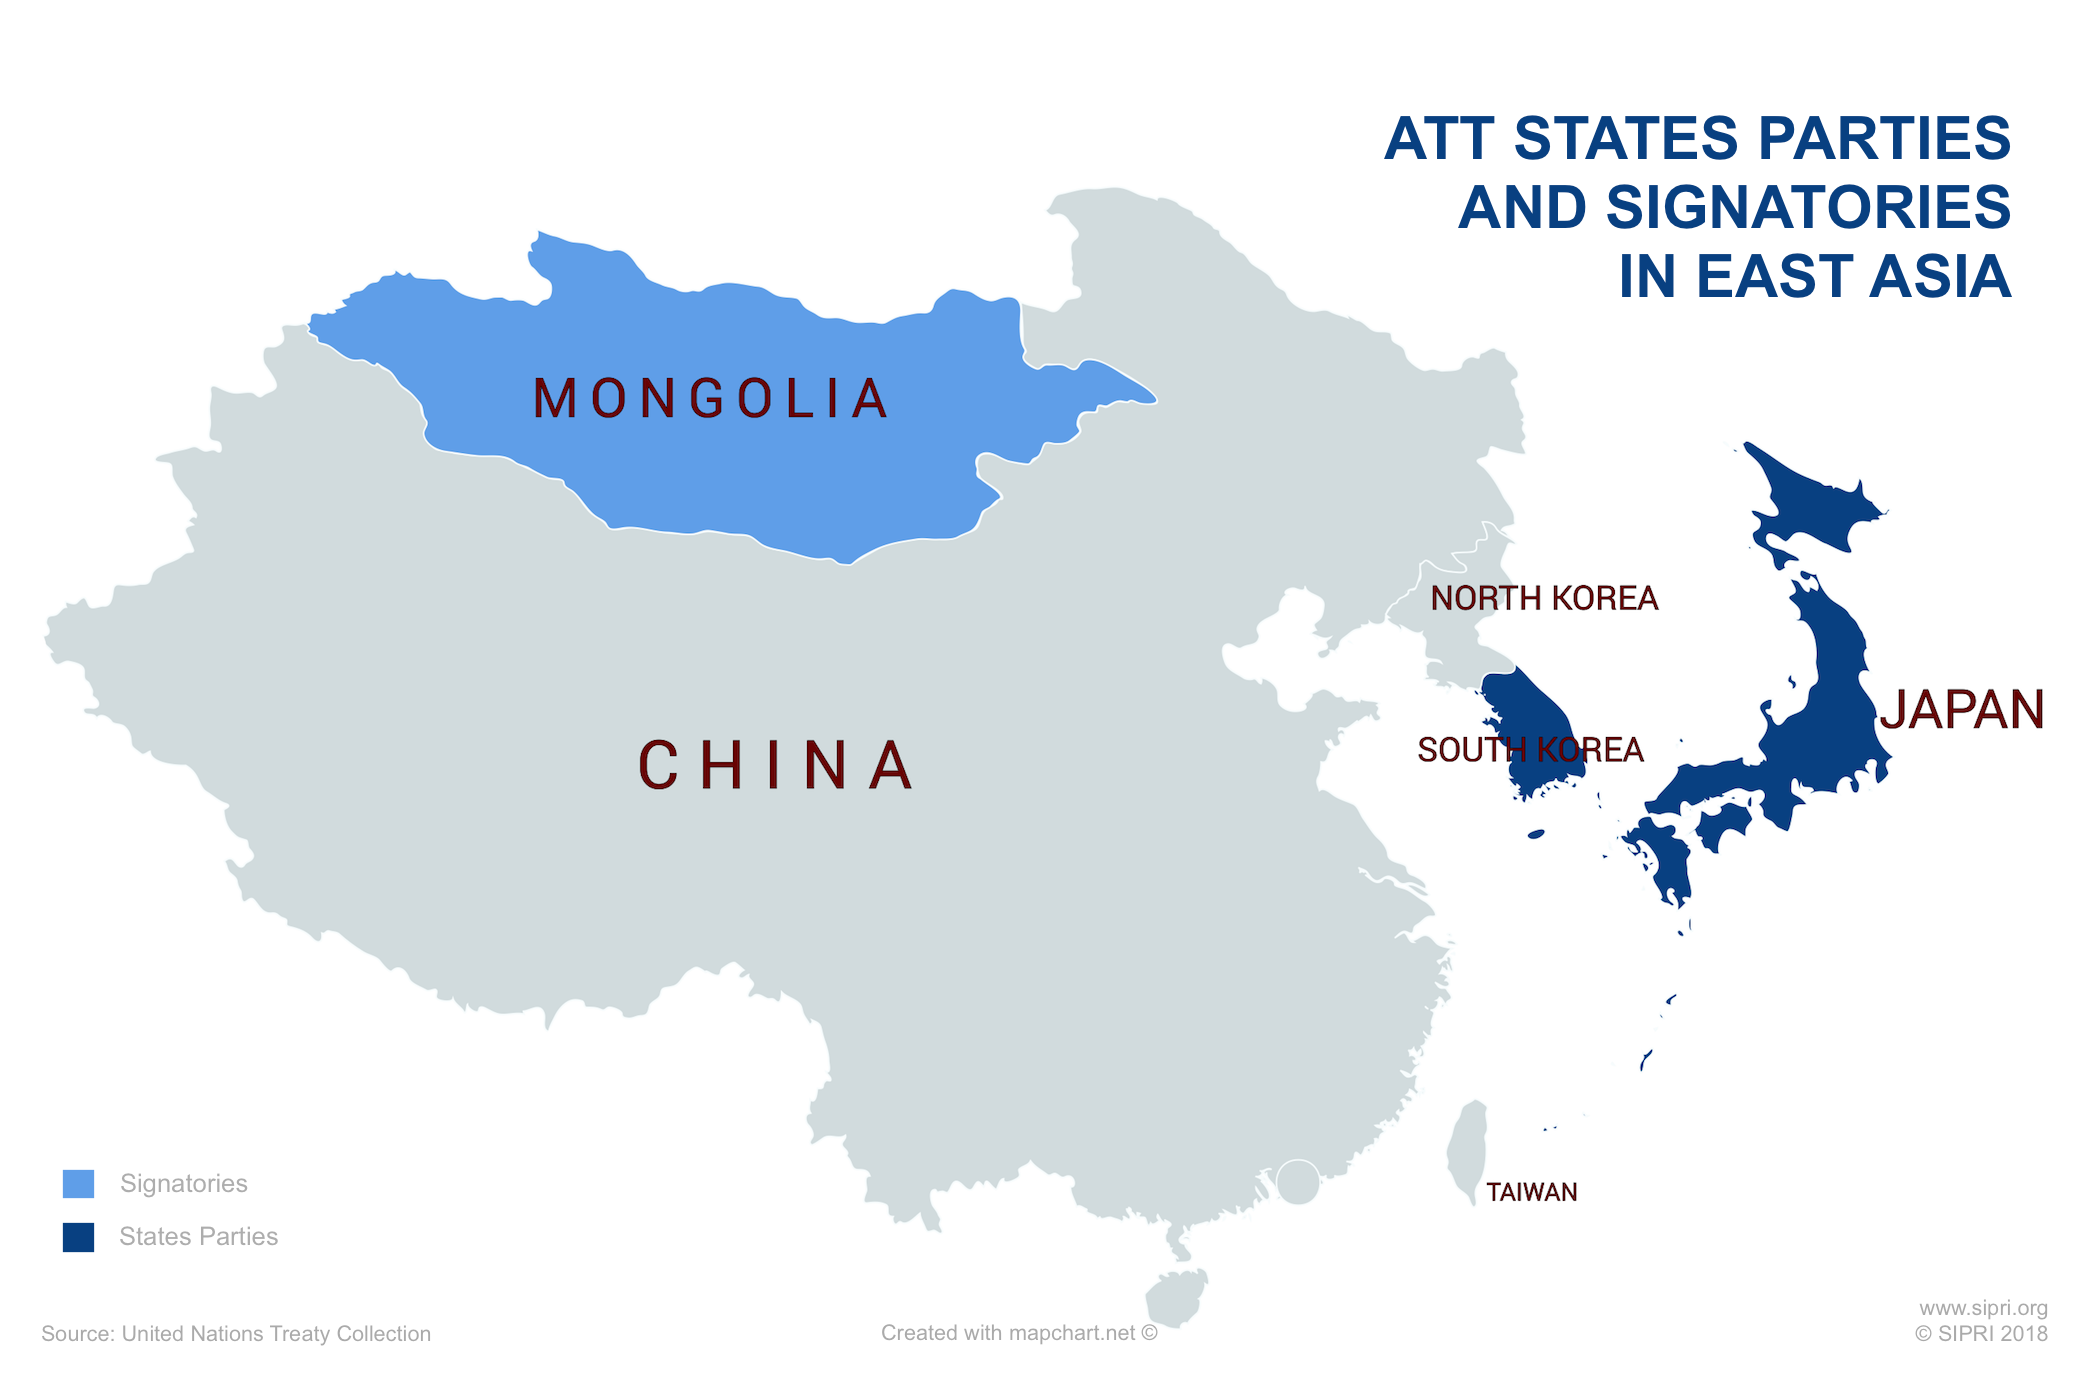 ATT states parties and signatories in East Asia